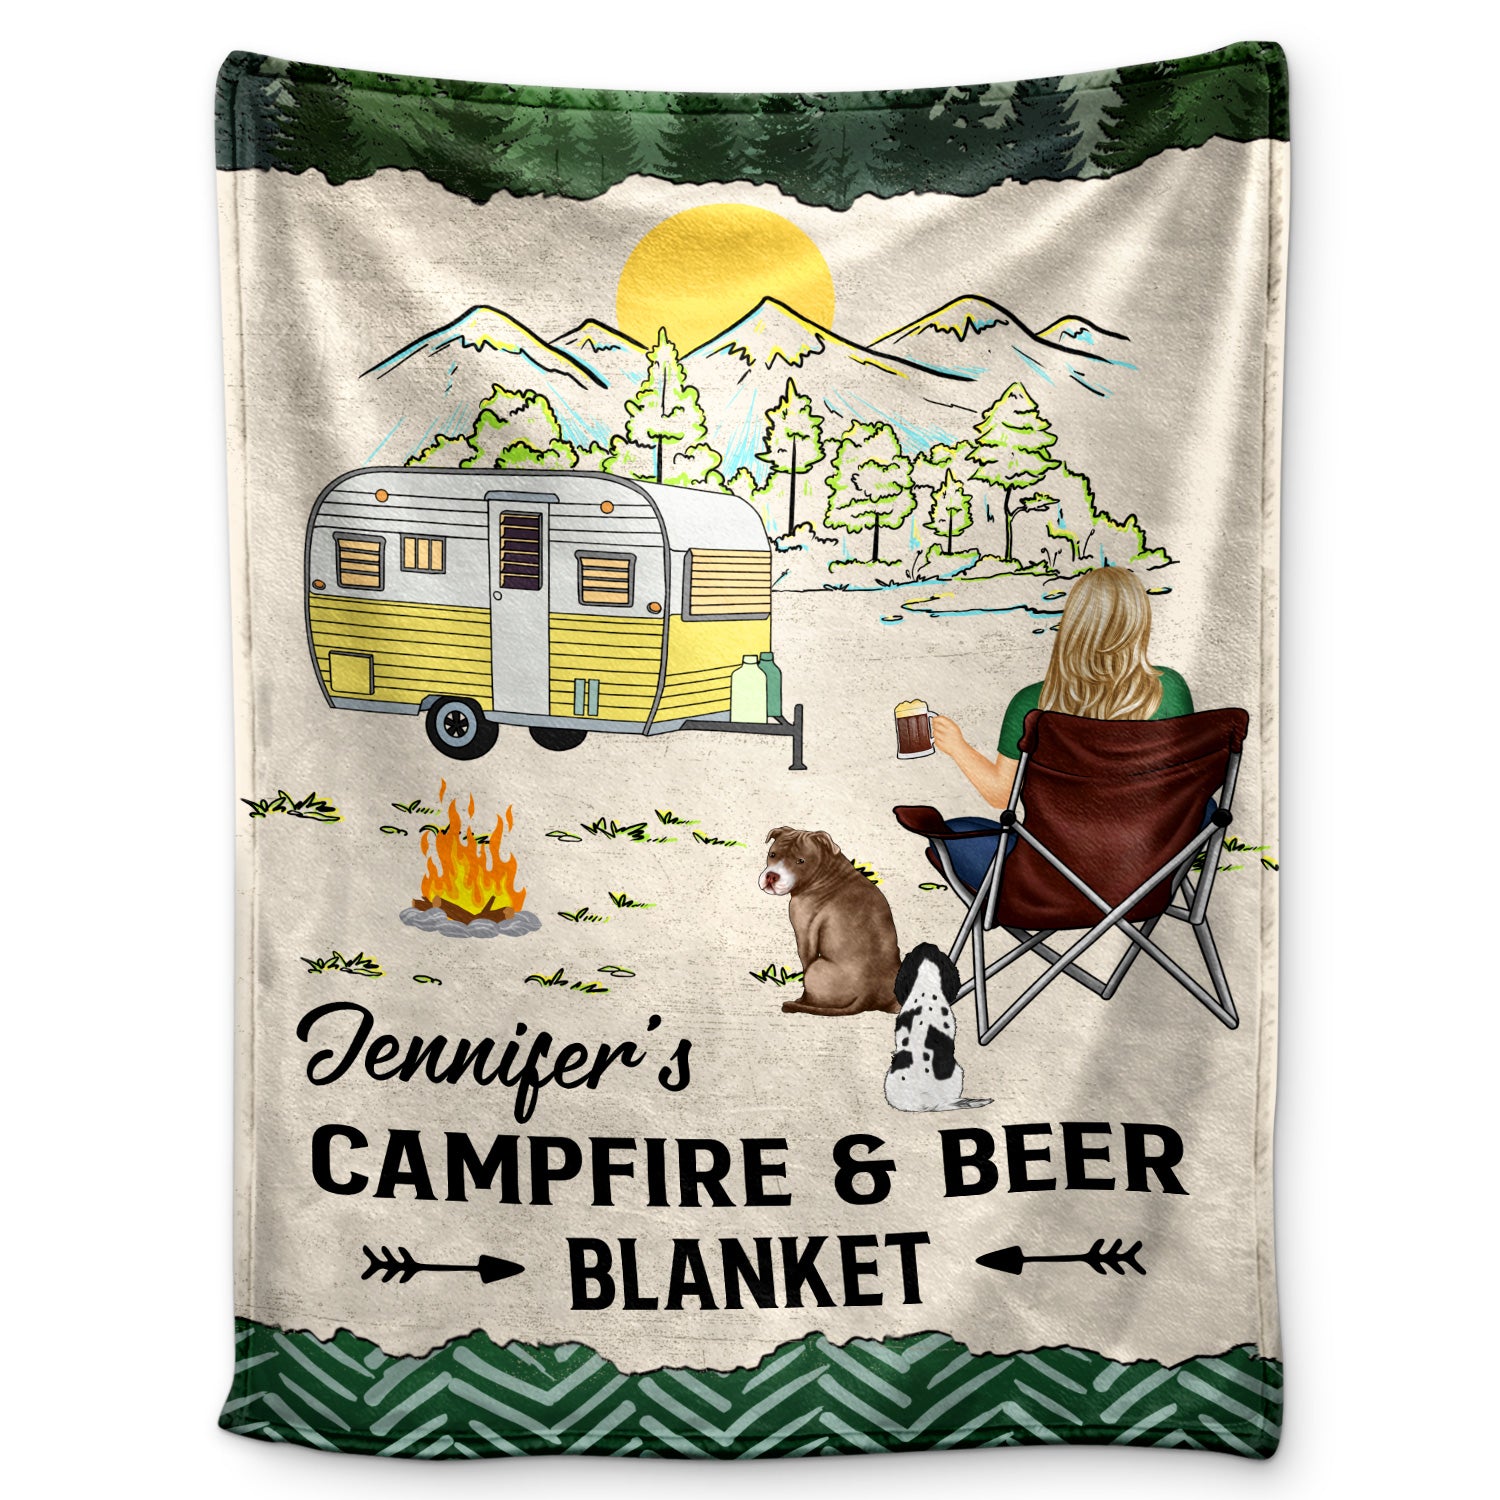 Camping Campfire & Beer Blanket - Gift For Camping Lovers - Personalized Fleece Blanket